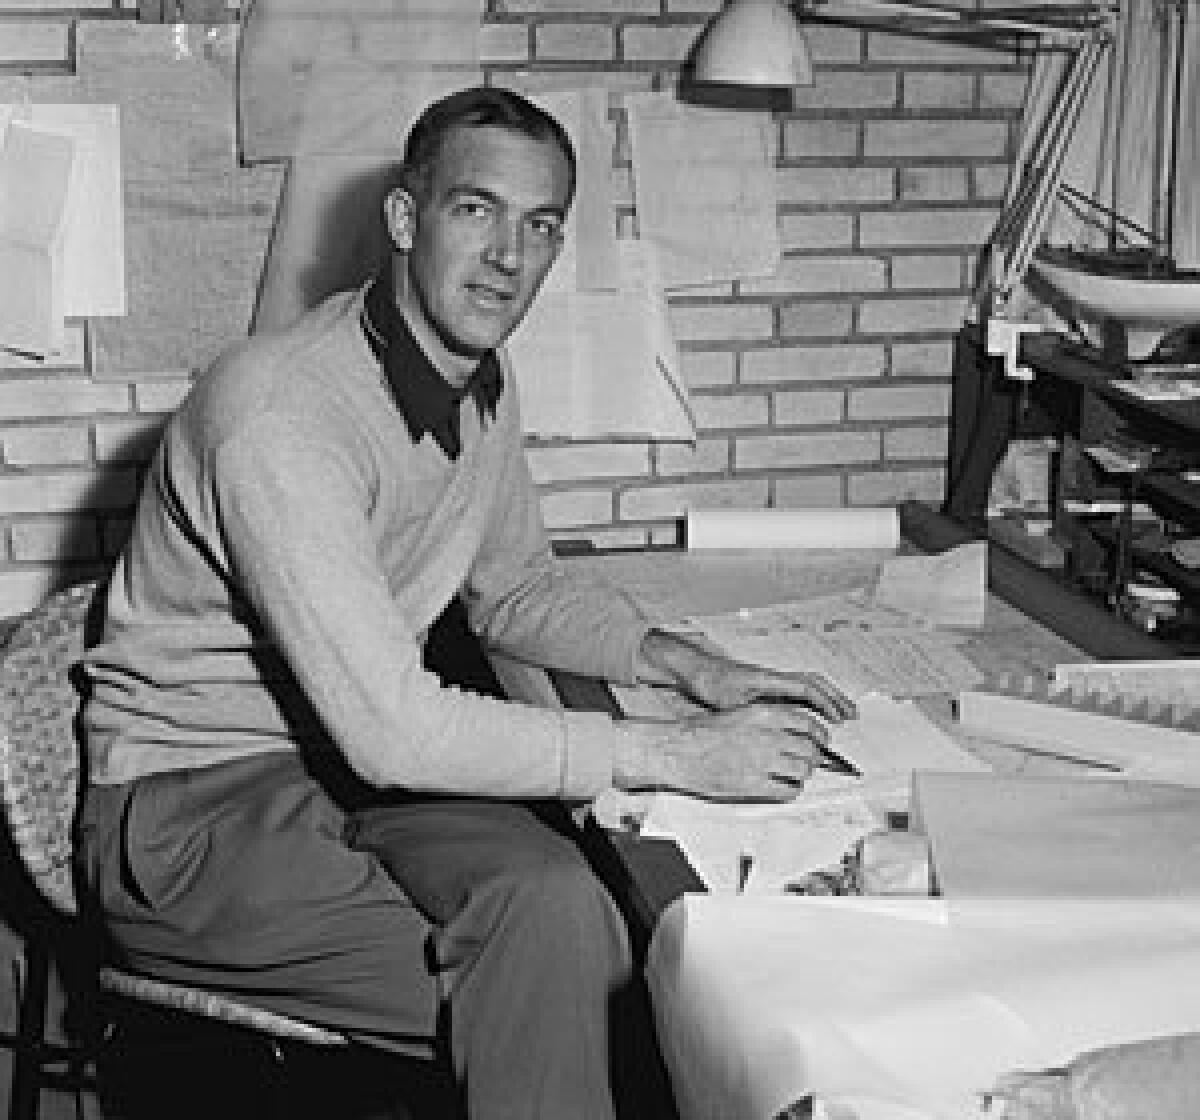 Jorn Utzon, in 1957 at age 38, received word at his home in Denmark that he won an international competition to build the opera house, beating out 232 other competitors. The project  whose overrun budget and delays sparked controversy  was a mixed blessing, giving the architect fame but also heartache.